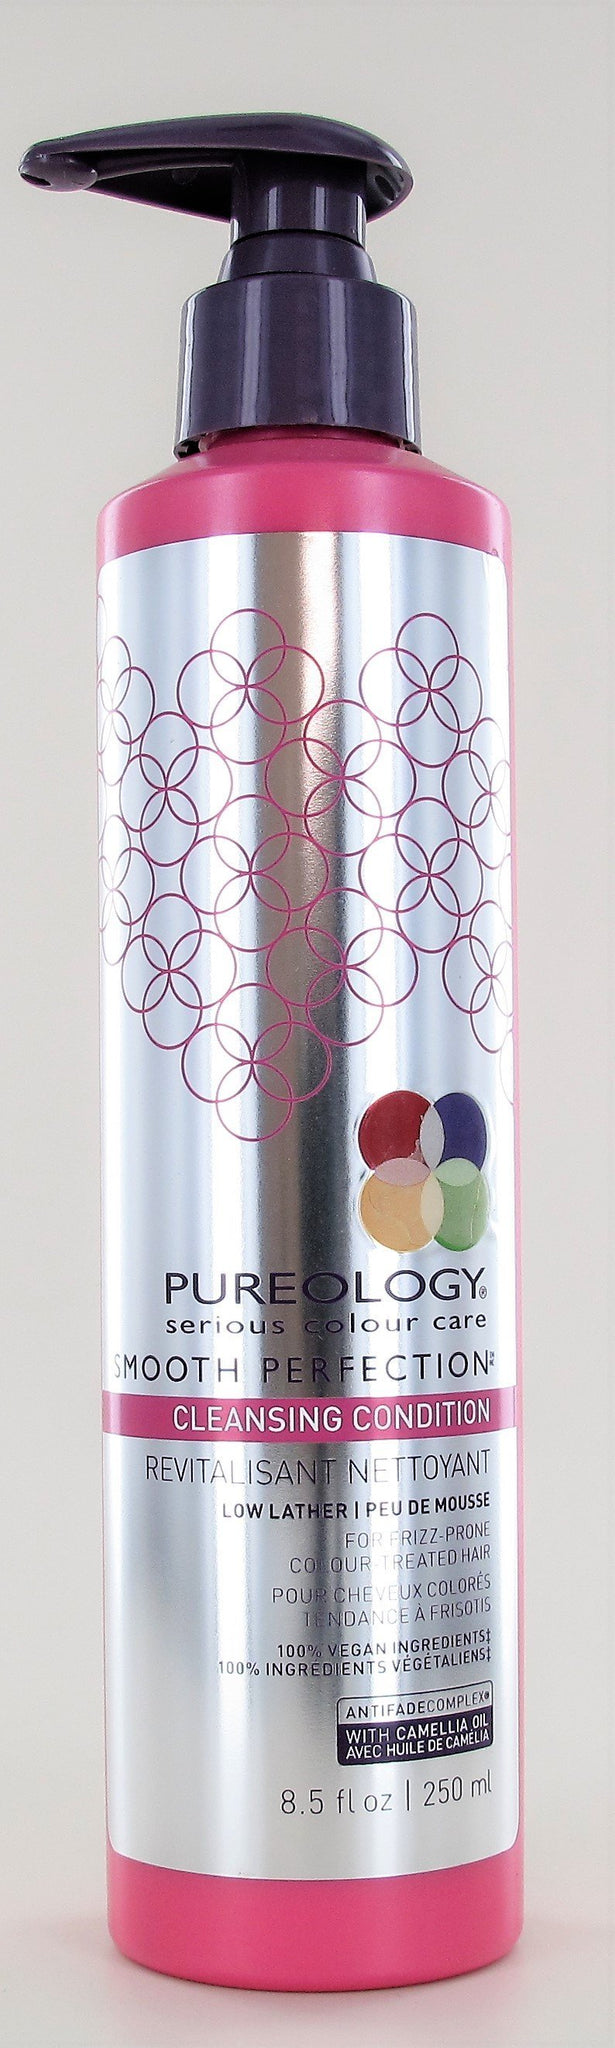 Pureology Smooth Perfection Cleansing Conditioner 8.5 oz